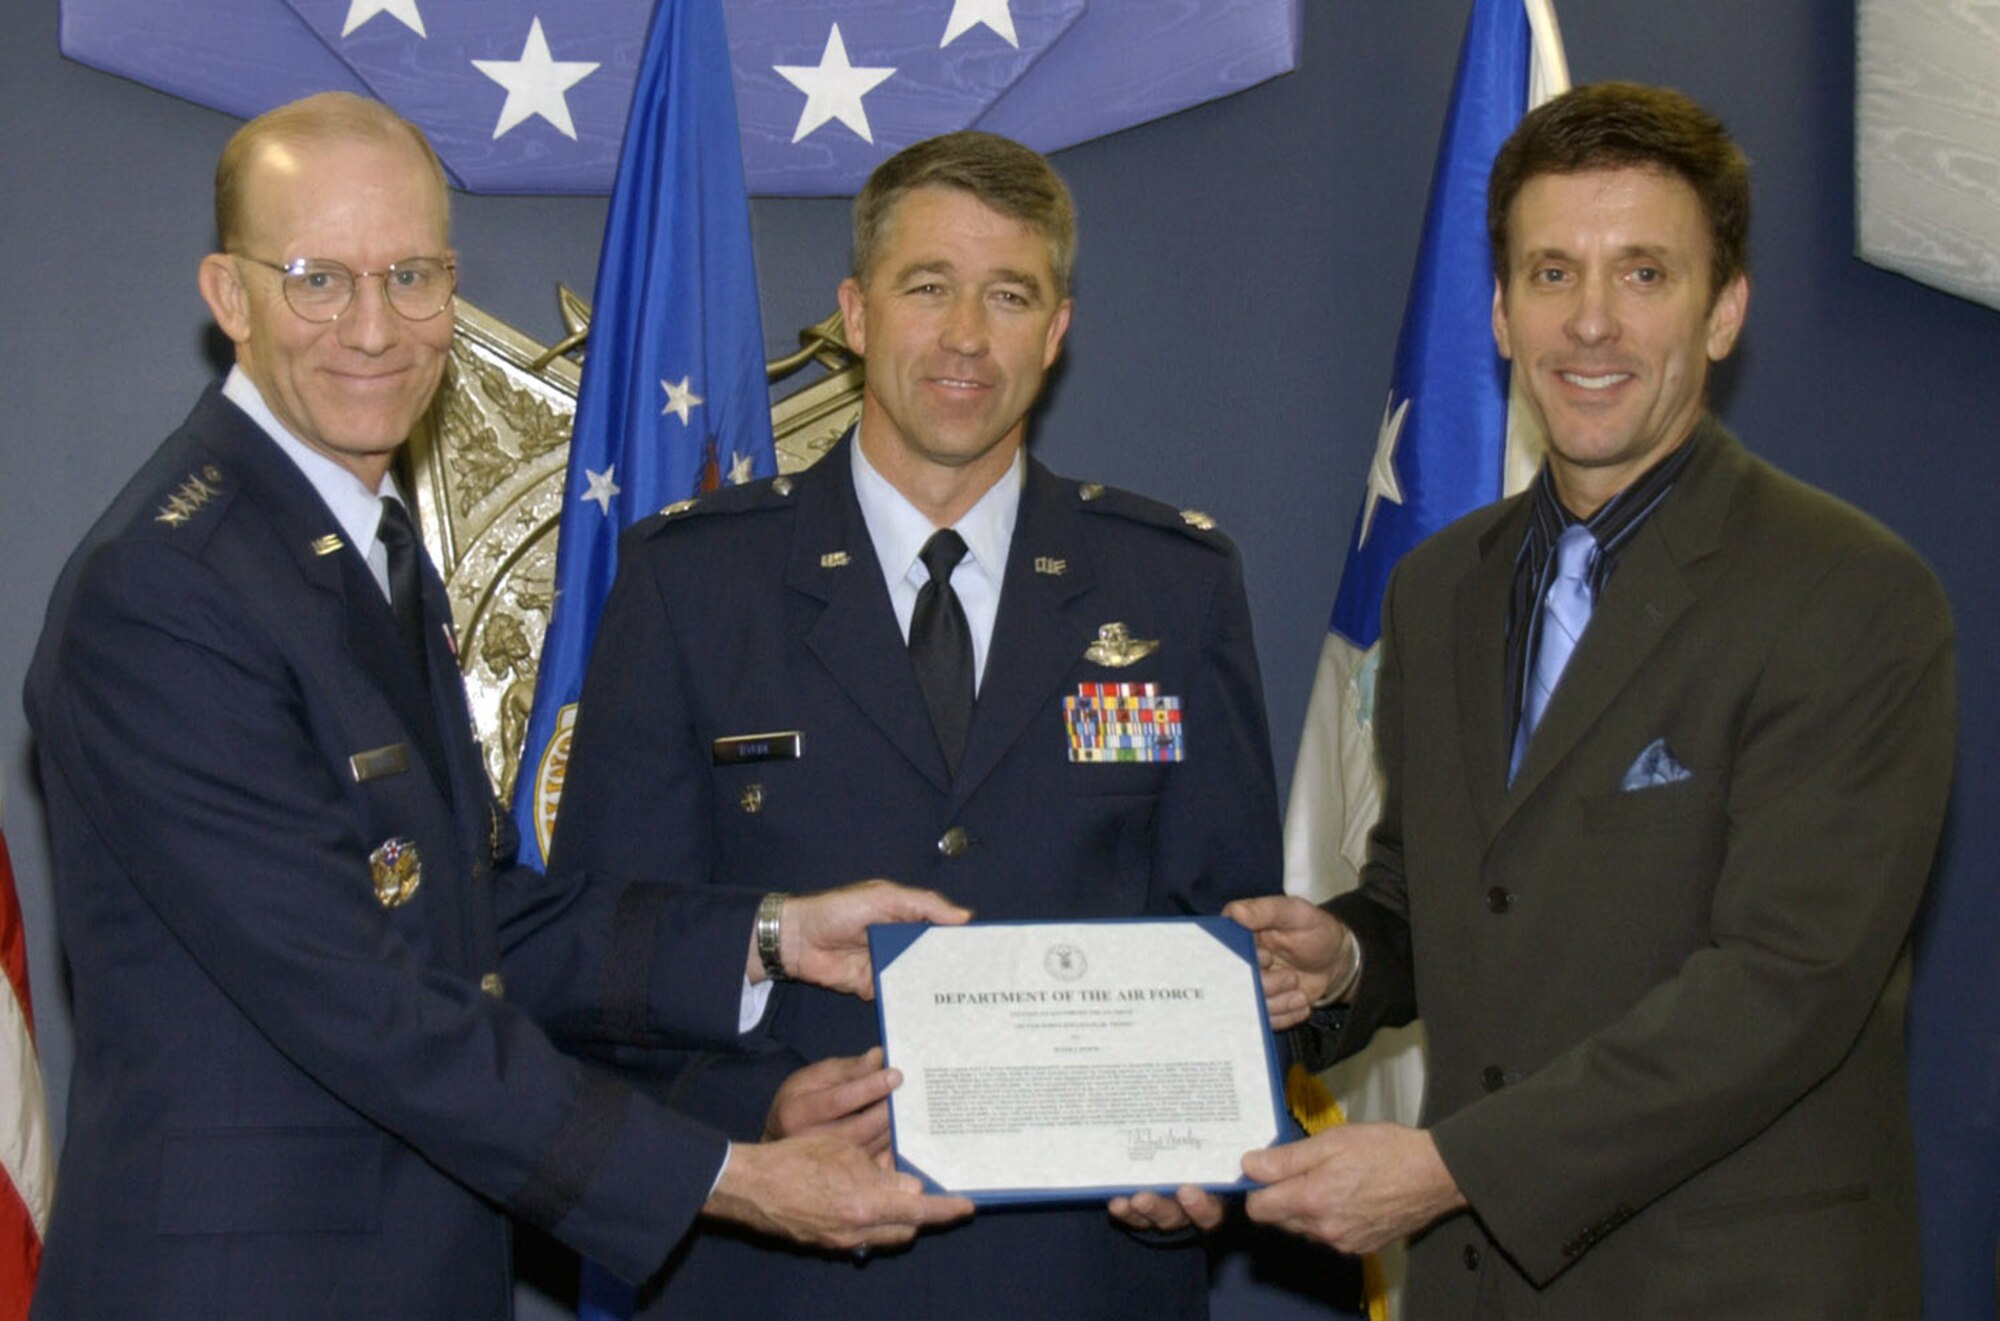 Air Force Vice Chief of Staff Gen. John D.W. Corley (left) and Koren Kolligian (right) present the Koren Kolligian Jr. Trophy to Lt. Col. Peter Byrne during a ceremony in the Pentagon June 5. The trophy, an Air Force safety award, is named after 1st Lt. Koren Kolligian Jr., whose T-33 Shooting Star went missing off the California coast in 1955.  The trophy is given annually to aircrew members who exhibit "outstanding feats of airmanship." Colonel Byrne, the 140th Wing vice commander, earned the award from an incident in June 2006 when he suffered a stroke while flying an F-16 but was able to safely land the plane 90 minutes later. Mr. Kolligian is the nephew of Lieutenant Kolligian. (U.S. Air Force photo/Staff Sgt. J.G. Buzanowski)